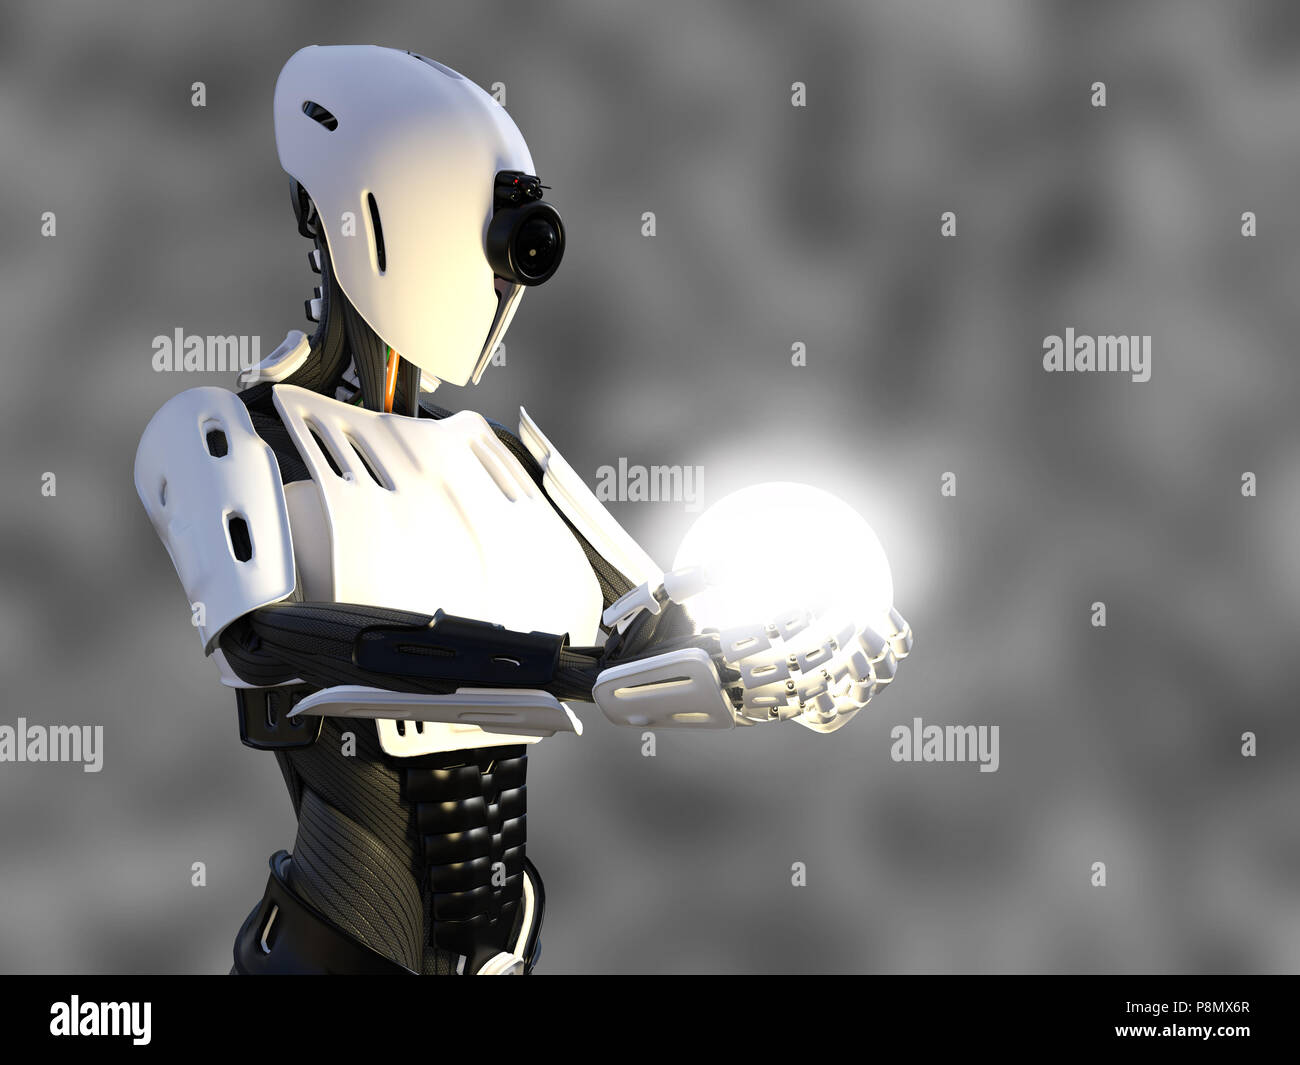 3D rendering of a female android robot holding a glowing sphere of energy or light in her hand against a gray background. Stock Photo